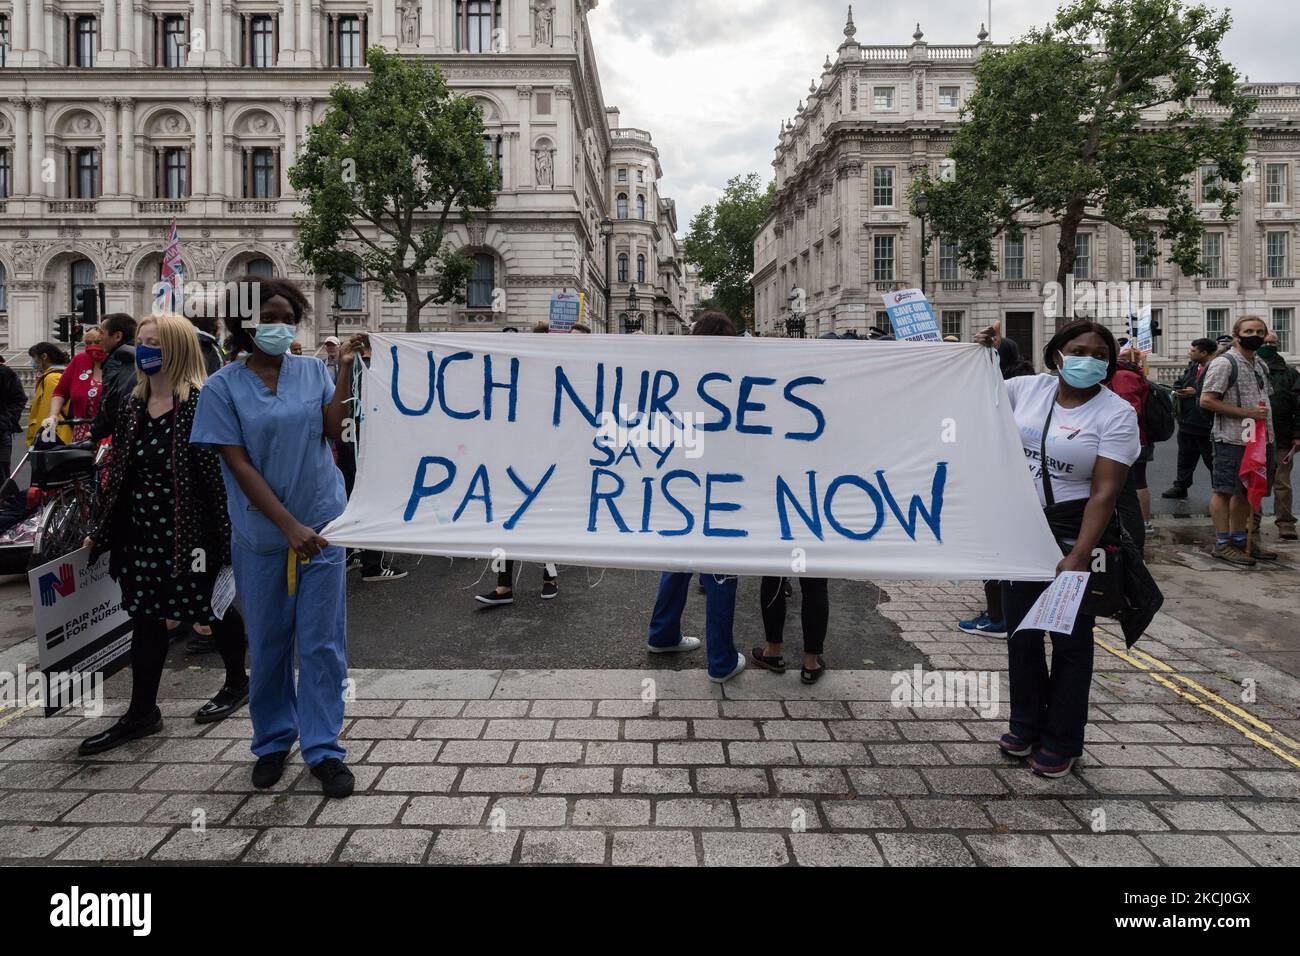 LONDON, UNITED KINGDOM - JULY 30, 2021: NHS staff and their supporters gather outside Downing Street during a protest demanding a fair pay increase for health workers on July 30, 2021 in London, England. The government has announced a 3% pay rise for the NHS staff in England and Wales following NHS Pay Review Body’s recommendations, however the campaigners argue the offer doesn't meet the inflation rate and undervalues healthcare workers who experienced unprecedented pressure during the coronavirus pandemic. (Photo by WIktor Szymanowicz/NurPhoto) Stock Photo